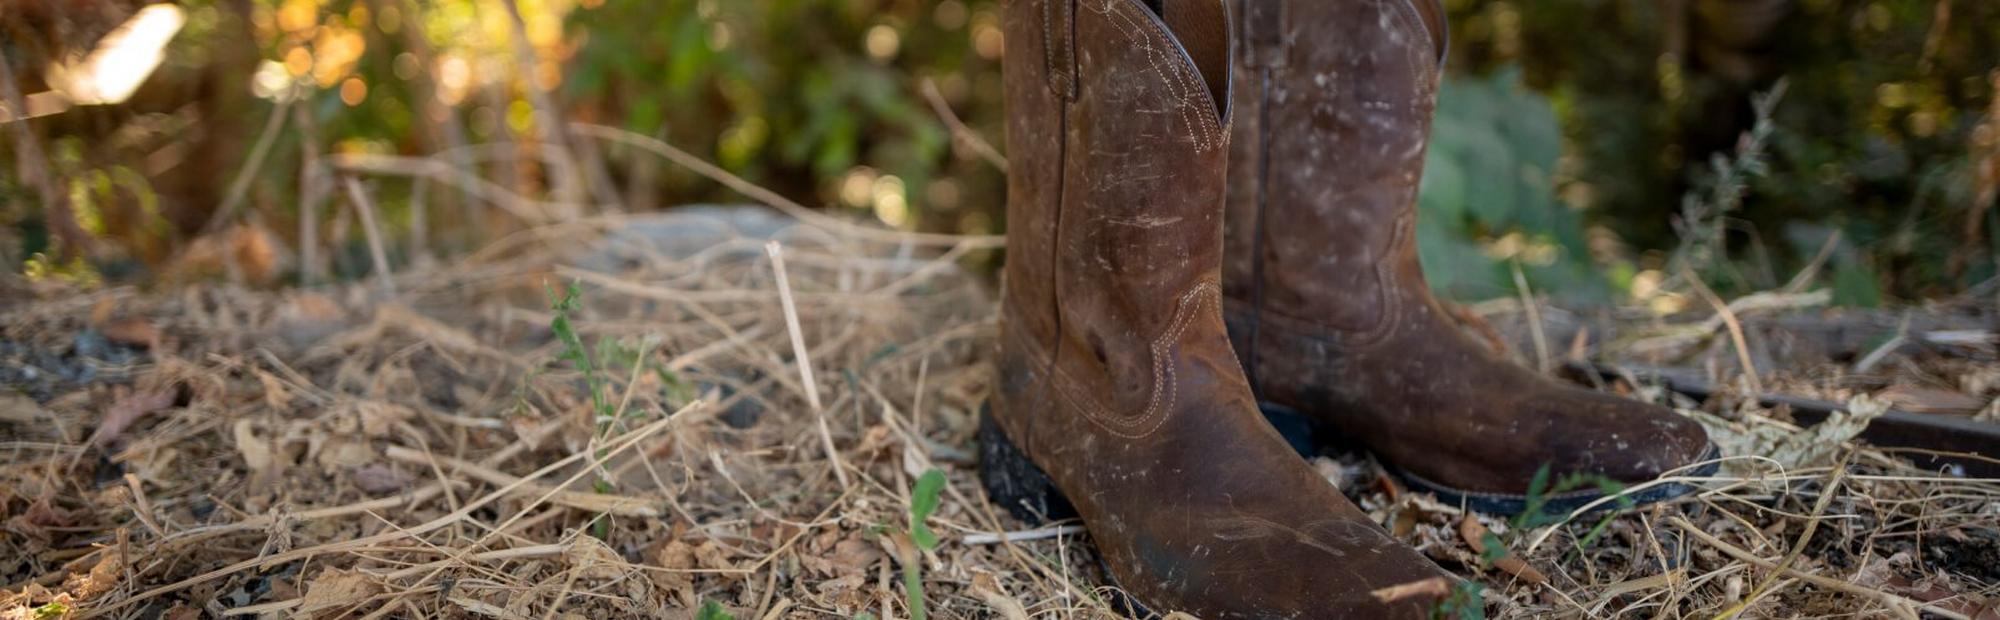 Roper vs Cowboy Boot - What's the Difference? | Ariat